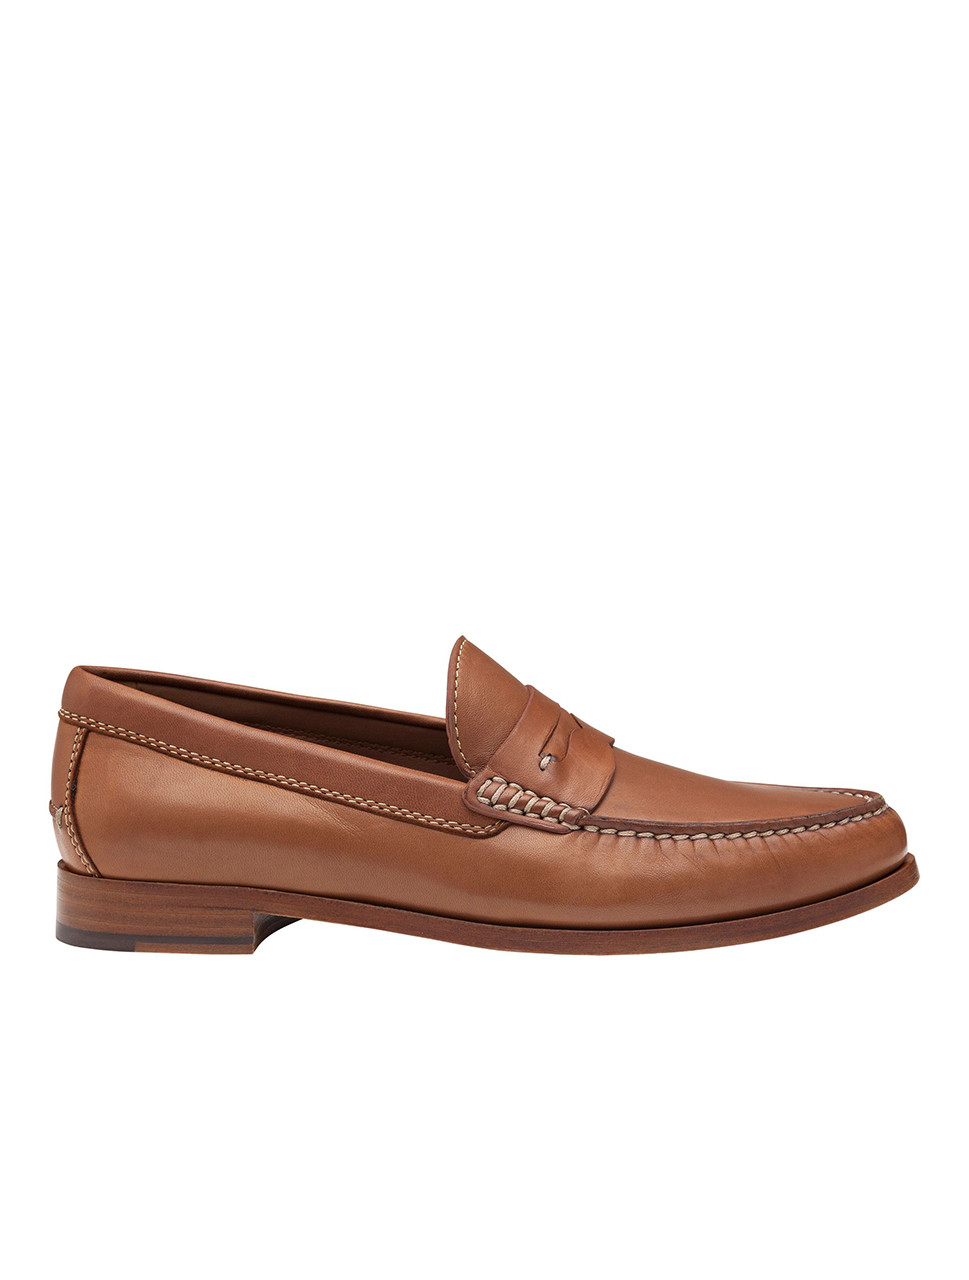 Baldwin Cognac Penny Loafer | Johnston & Murphy Collection - Harpers